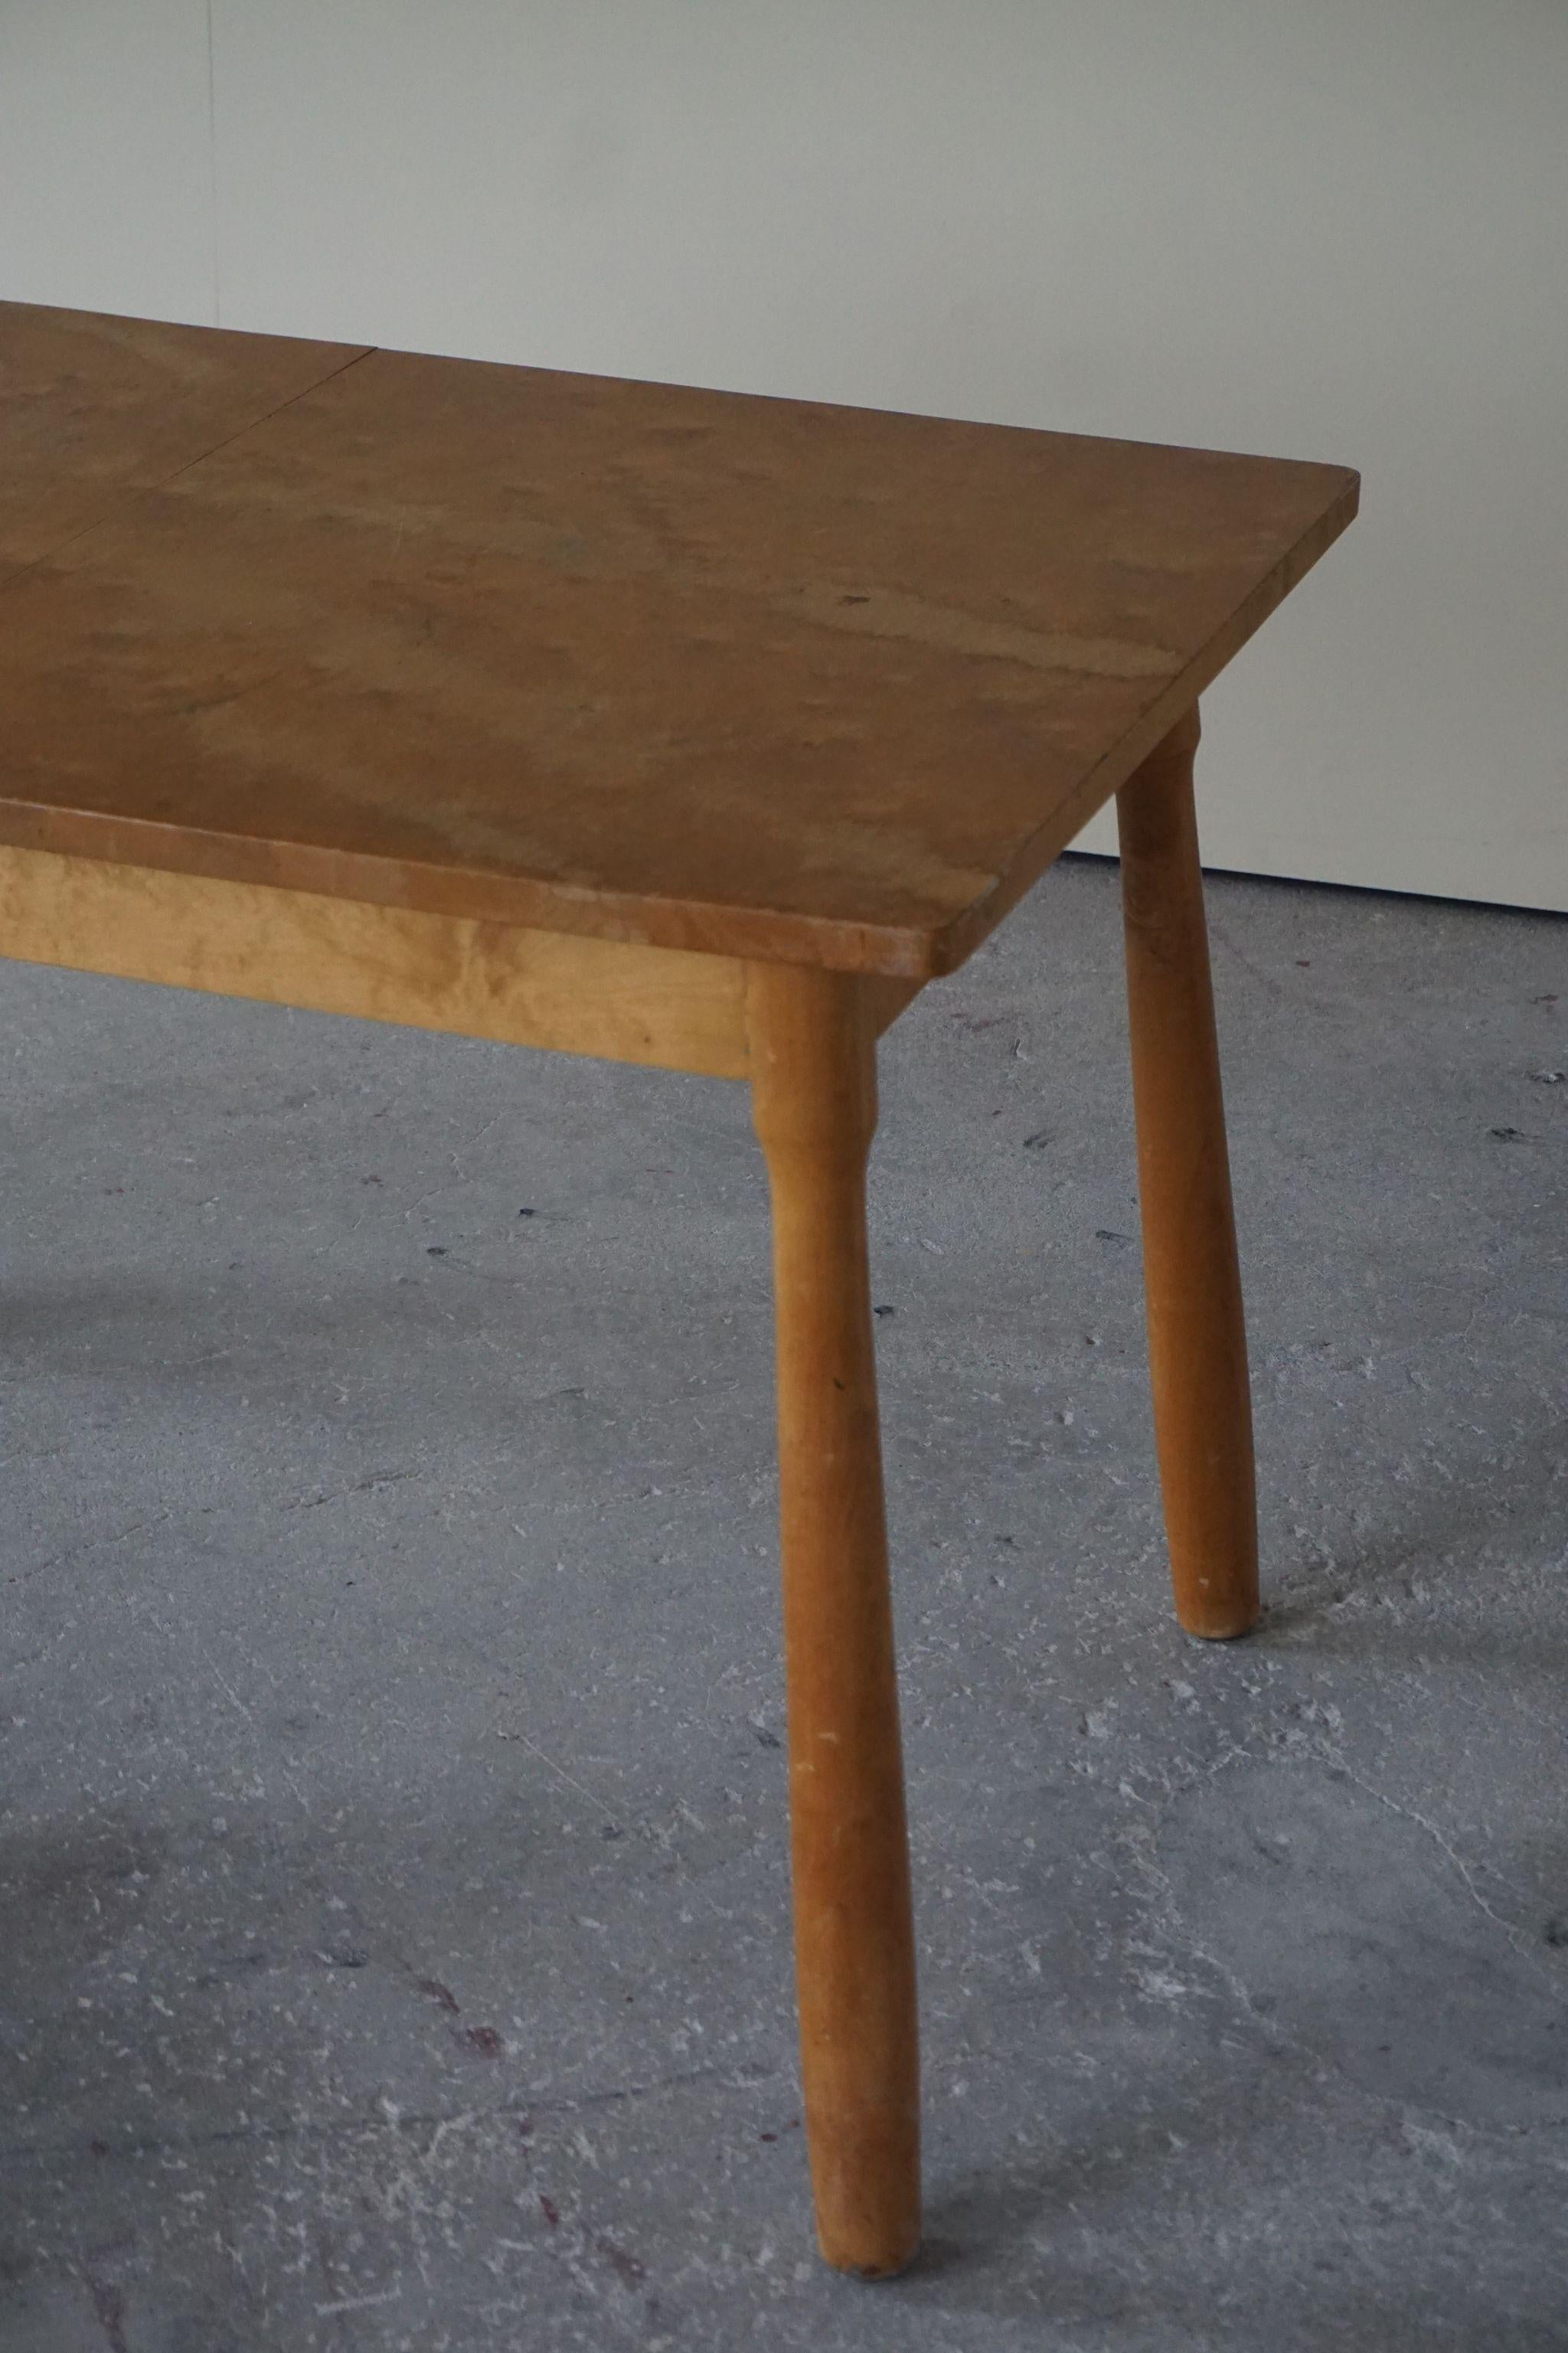 Danish Modern Desk / Dining Table in Birch Attributed to Philip Arctander, 1940s In Fair Condition For Sale In Odense, DK